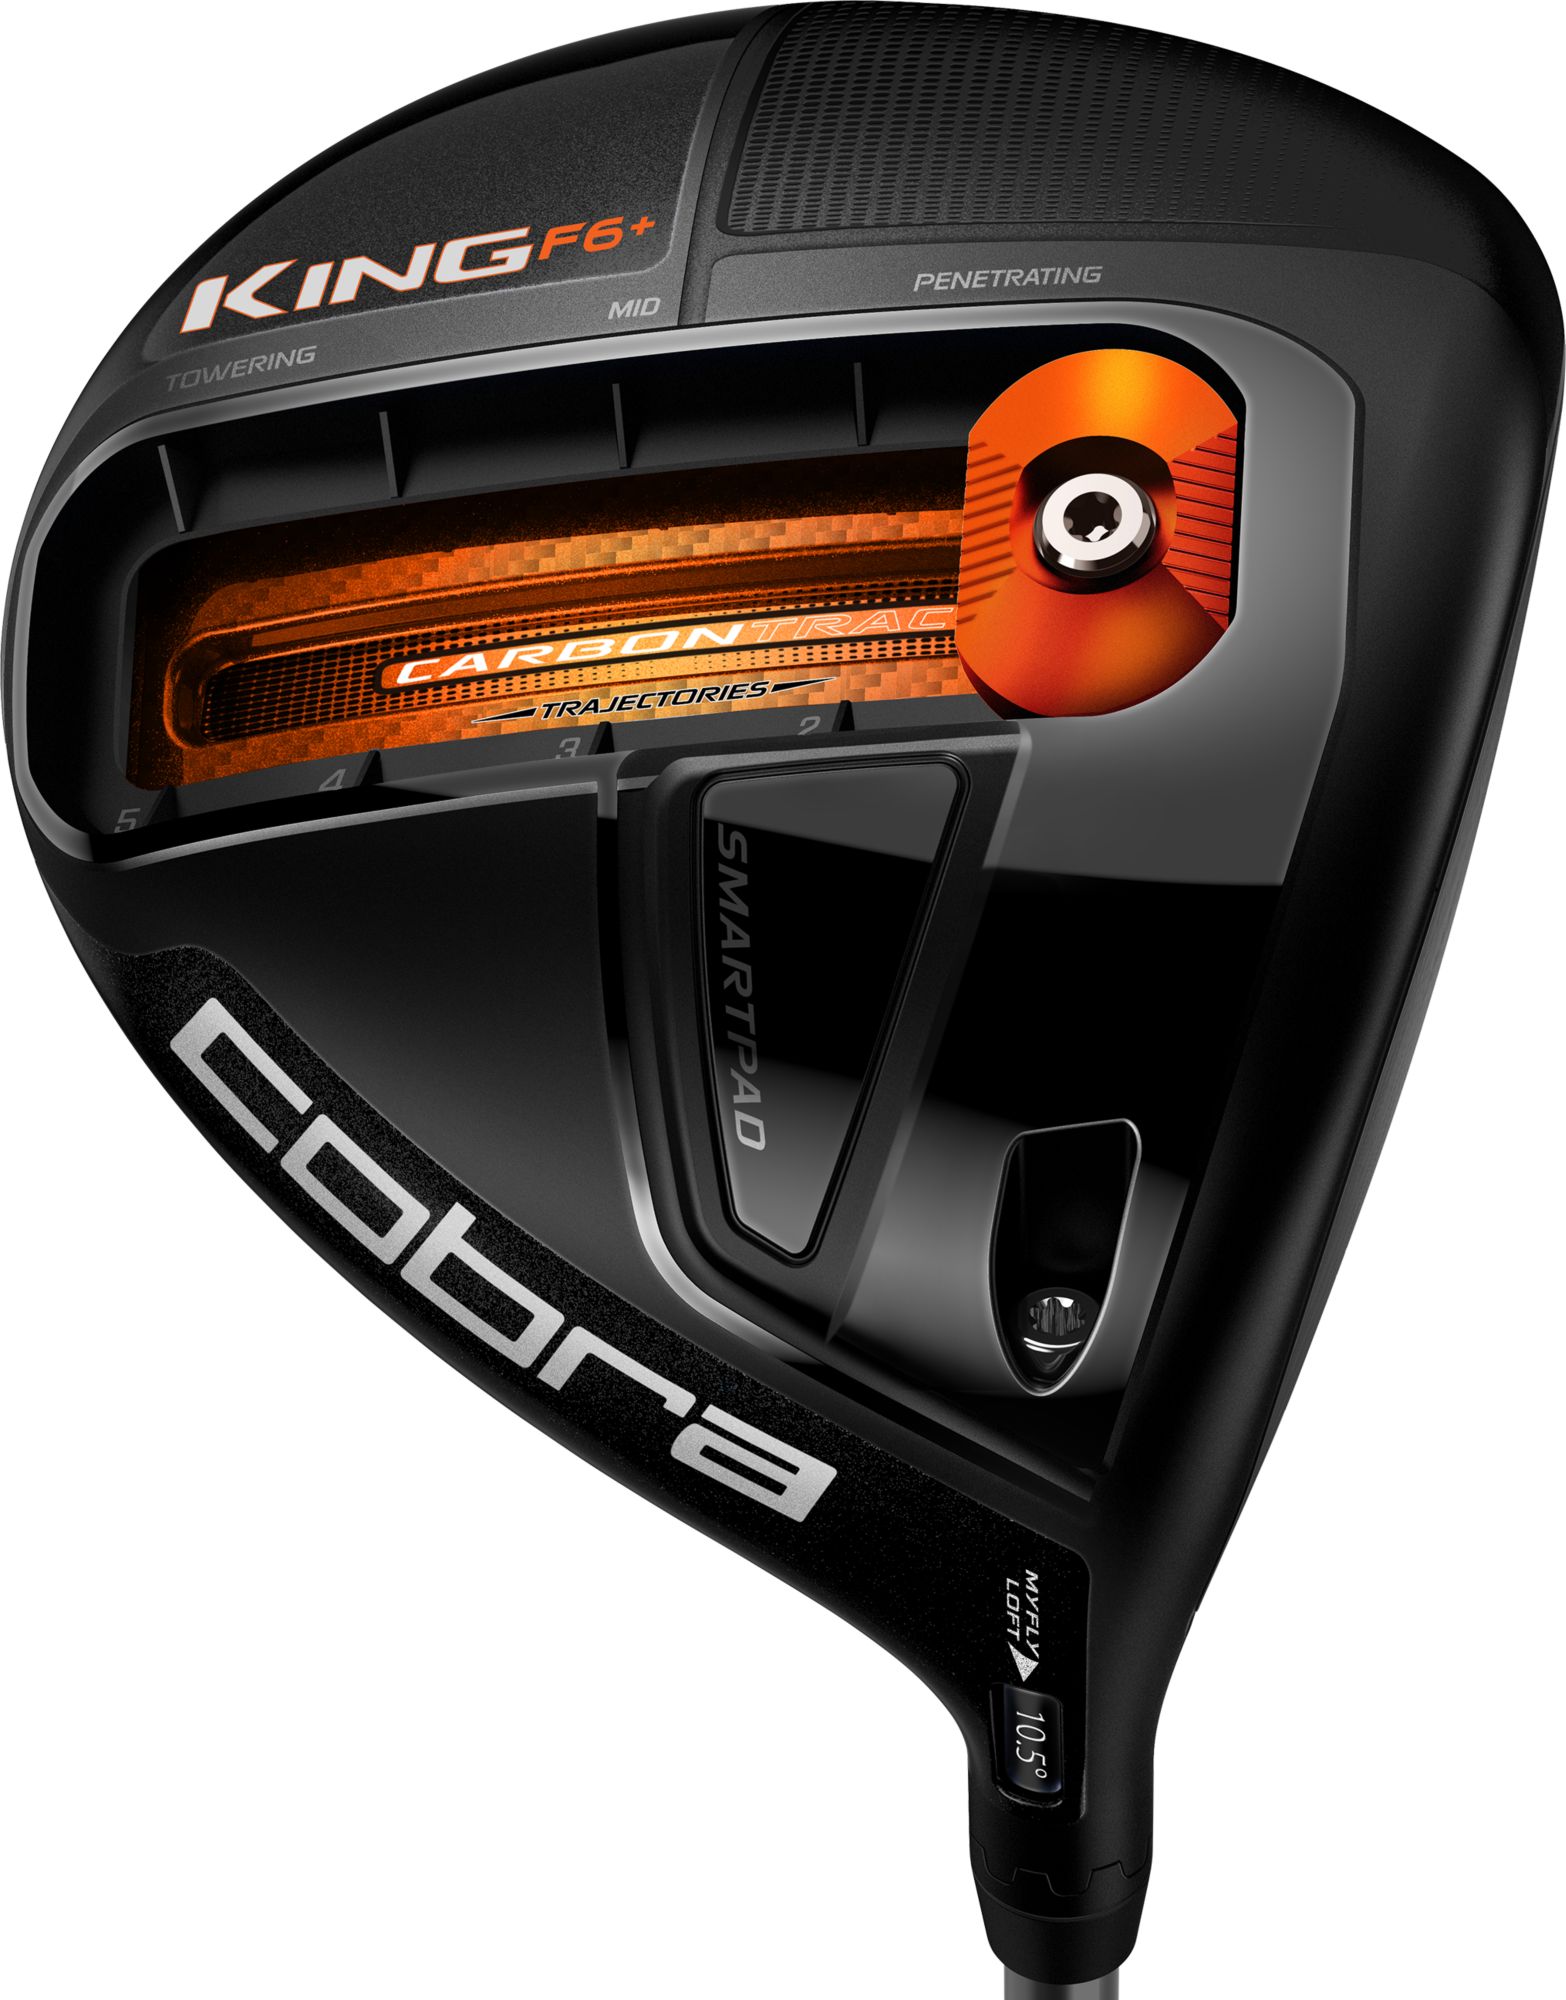 Cobra's king f7, king f7+ driver, fairway forest, hybrids 